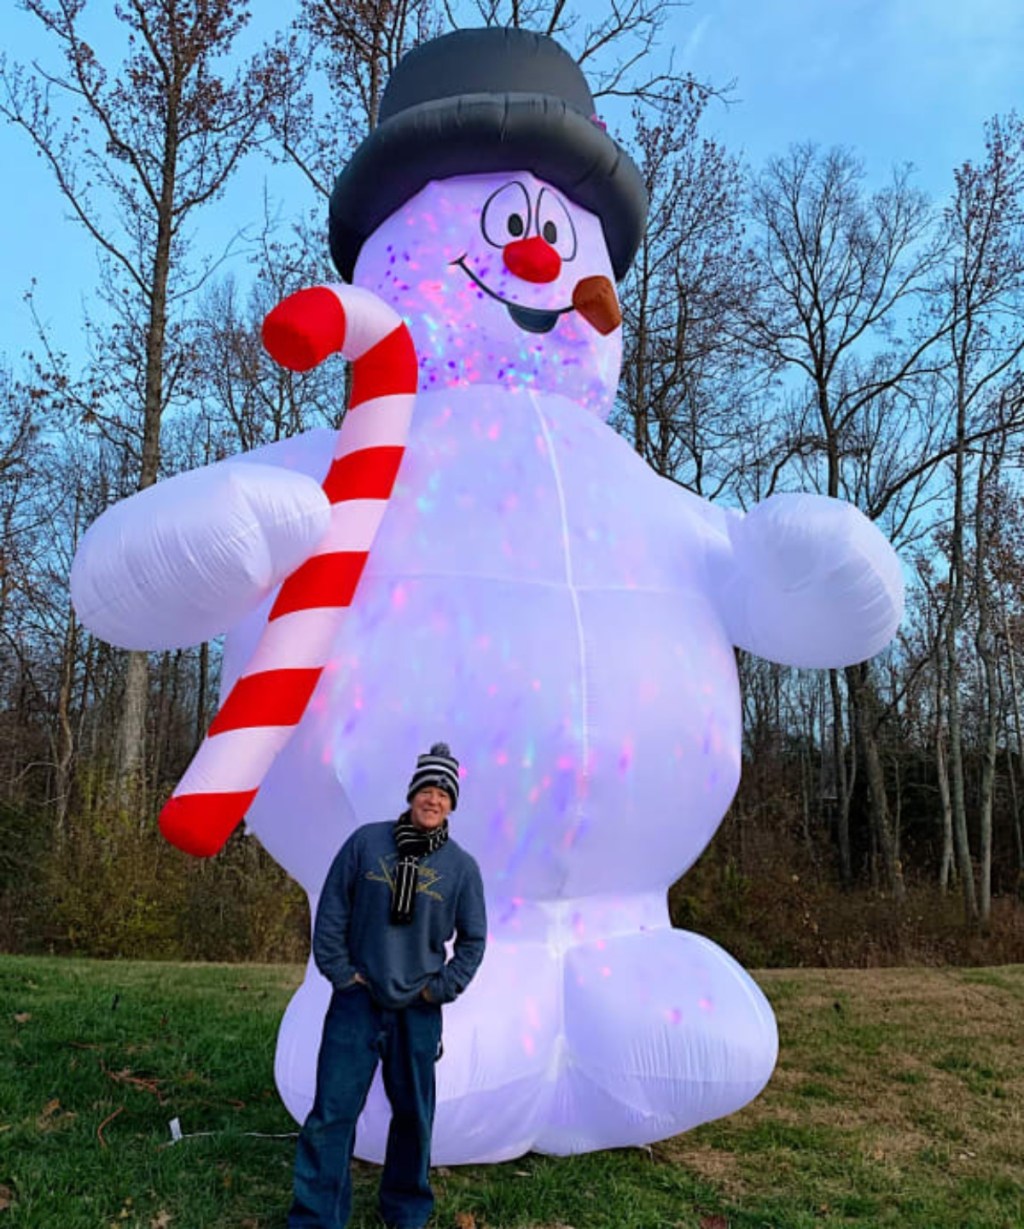 man standing next to giant Frosy inflatable